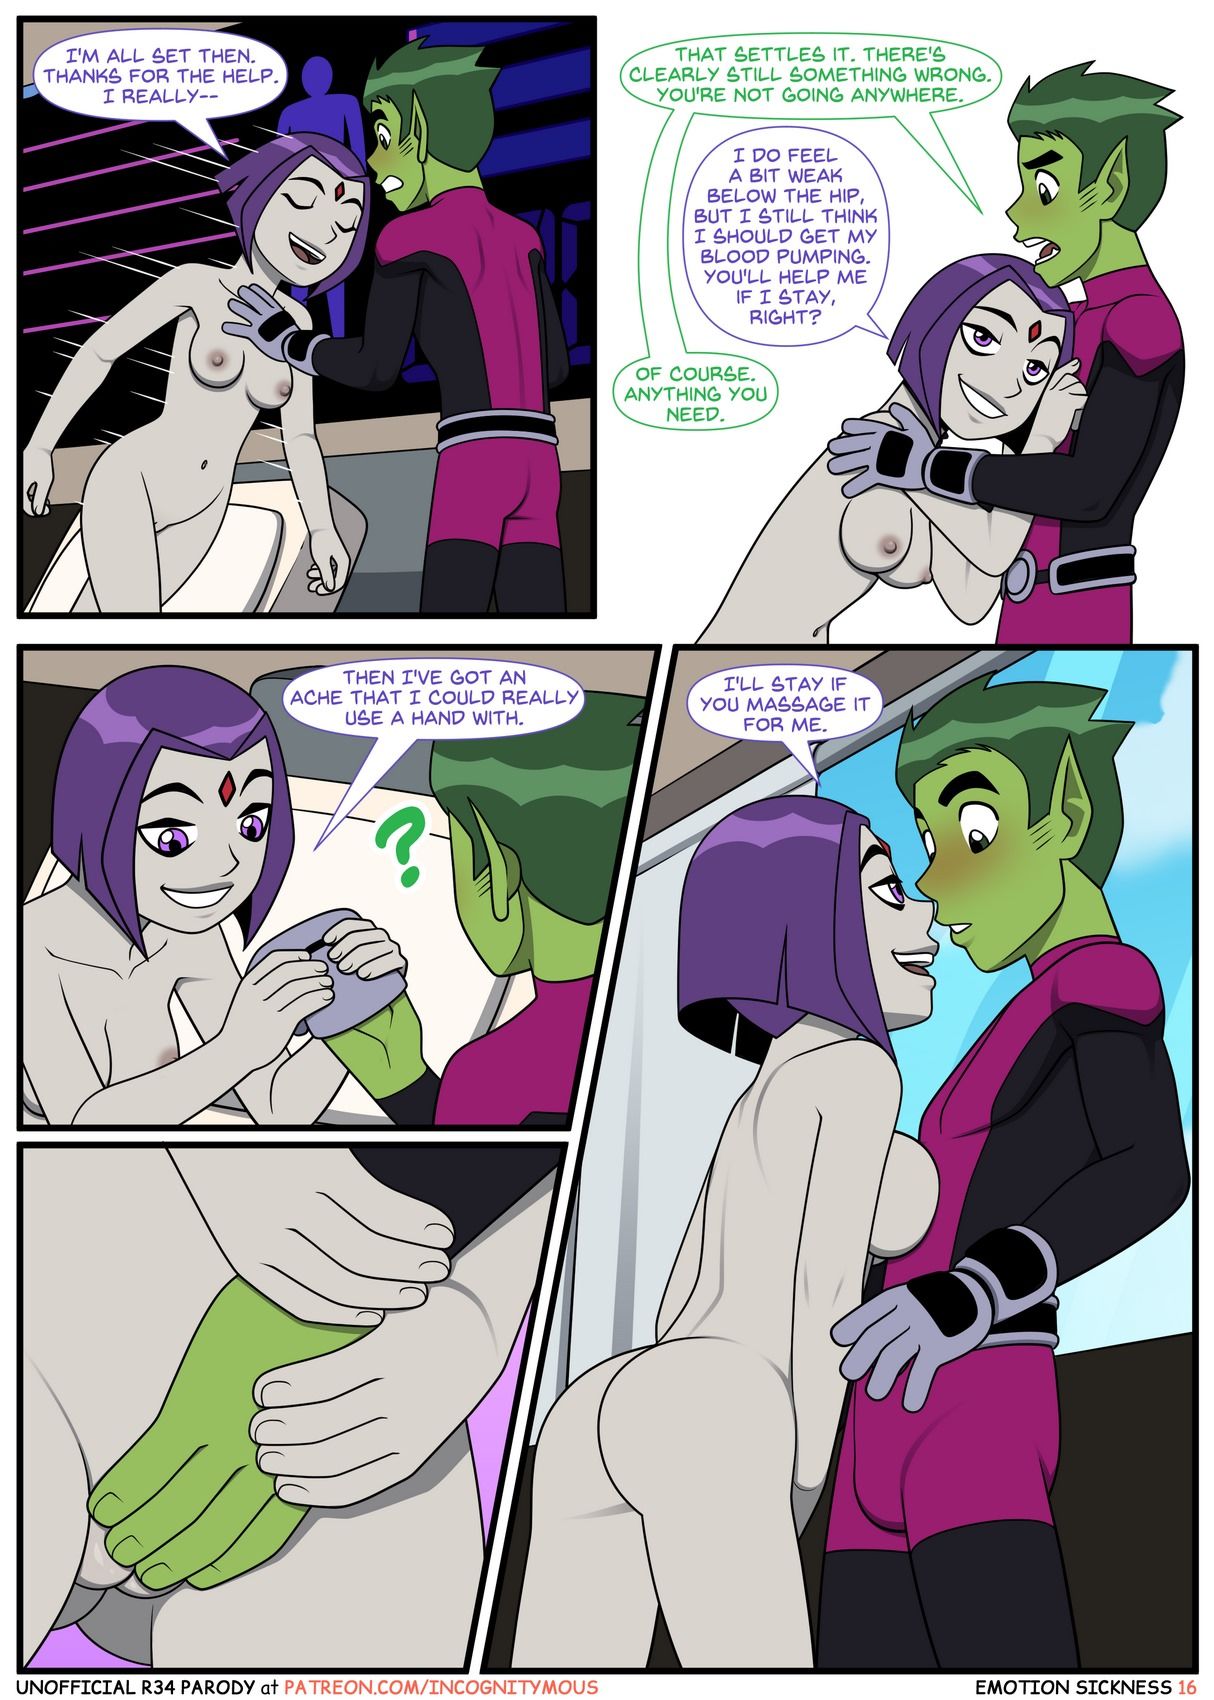 Teen Titans - Emotion Sickness (Incognitymous) page 31